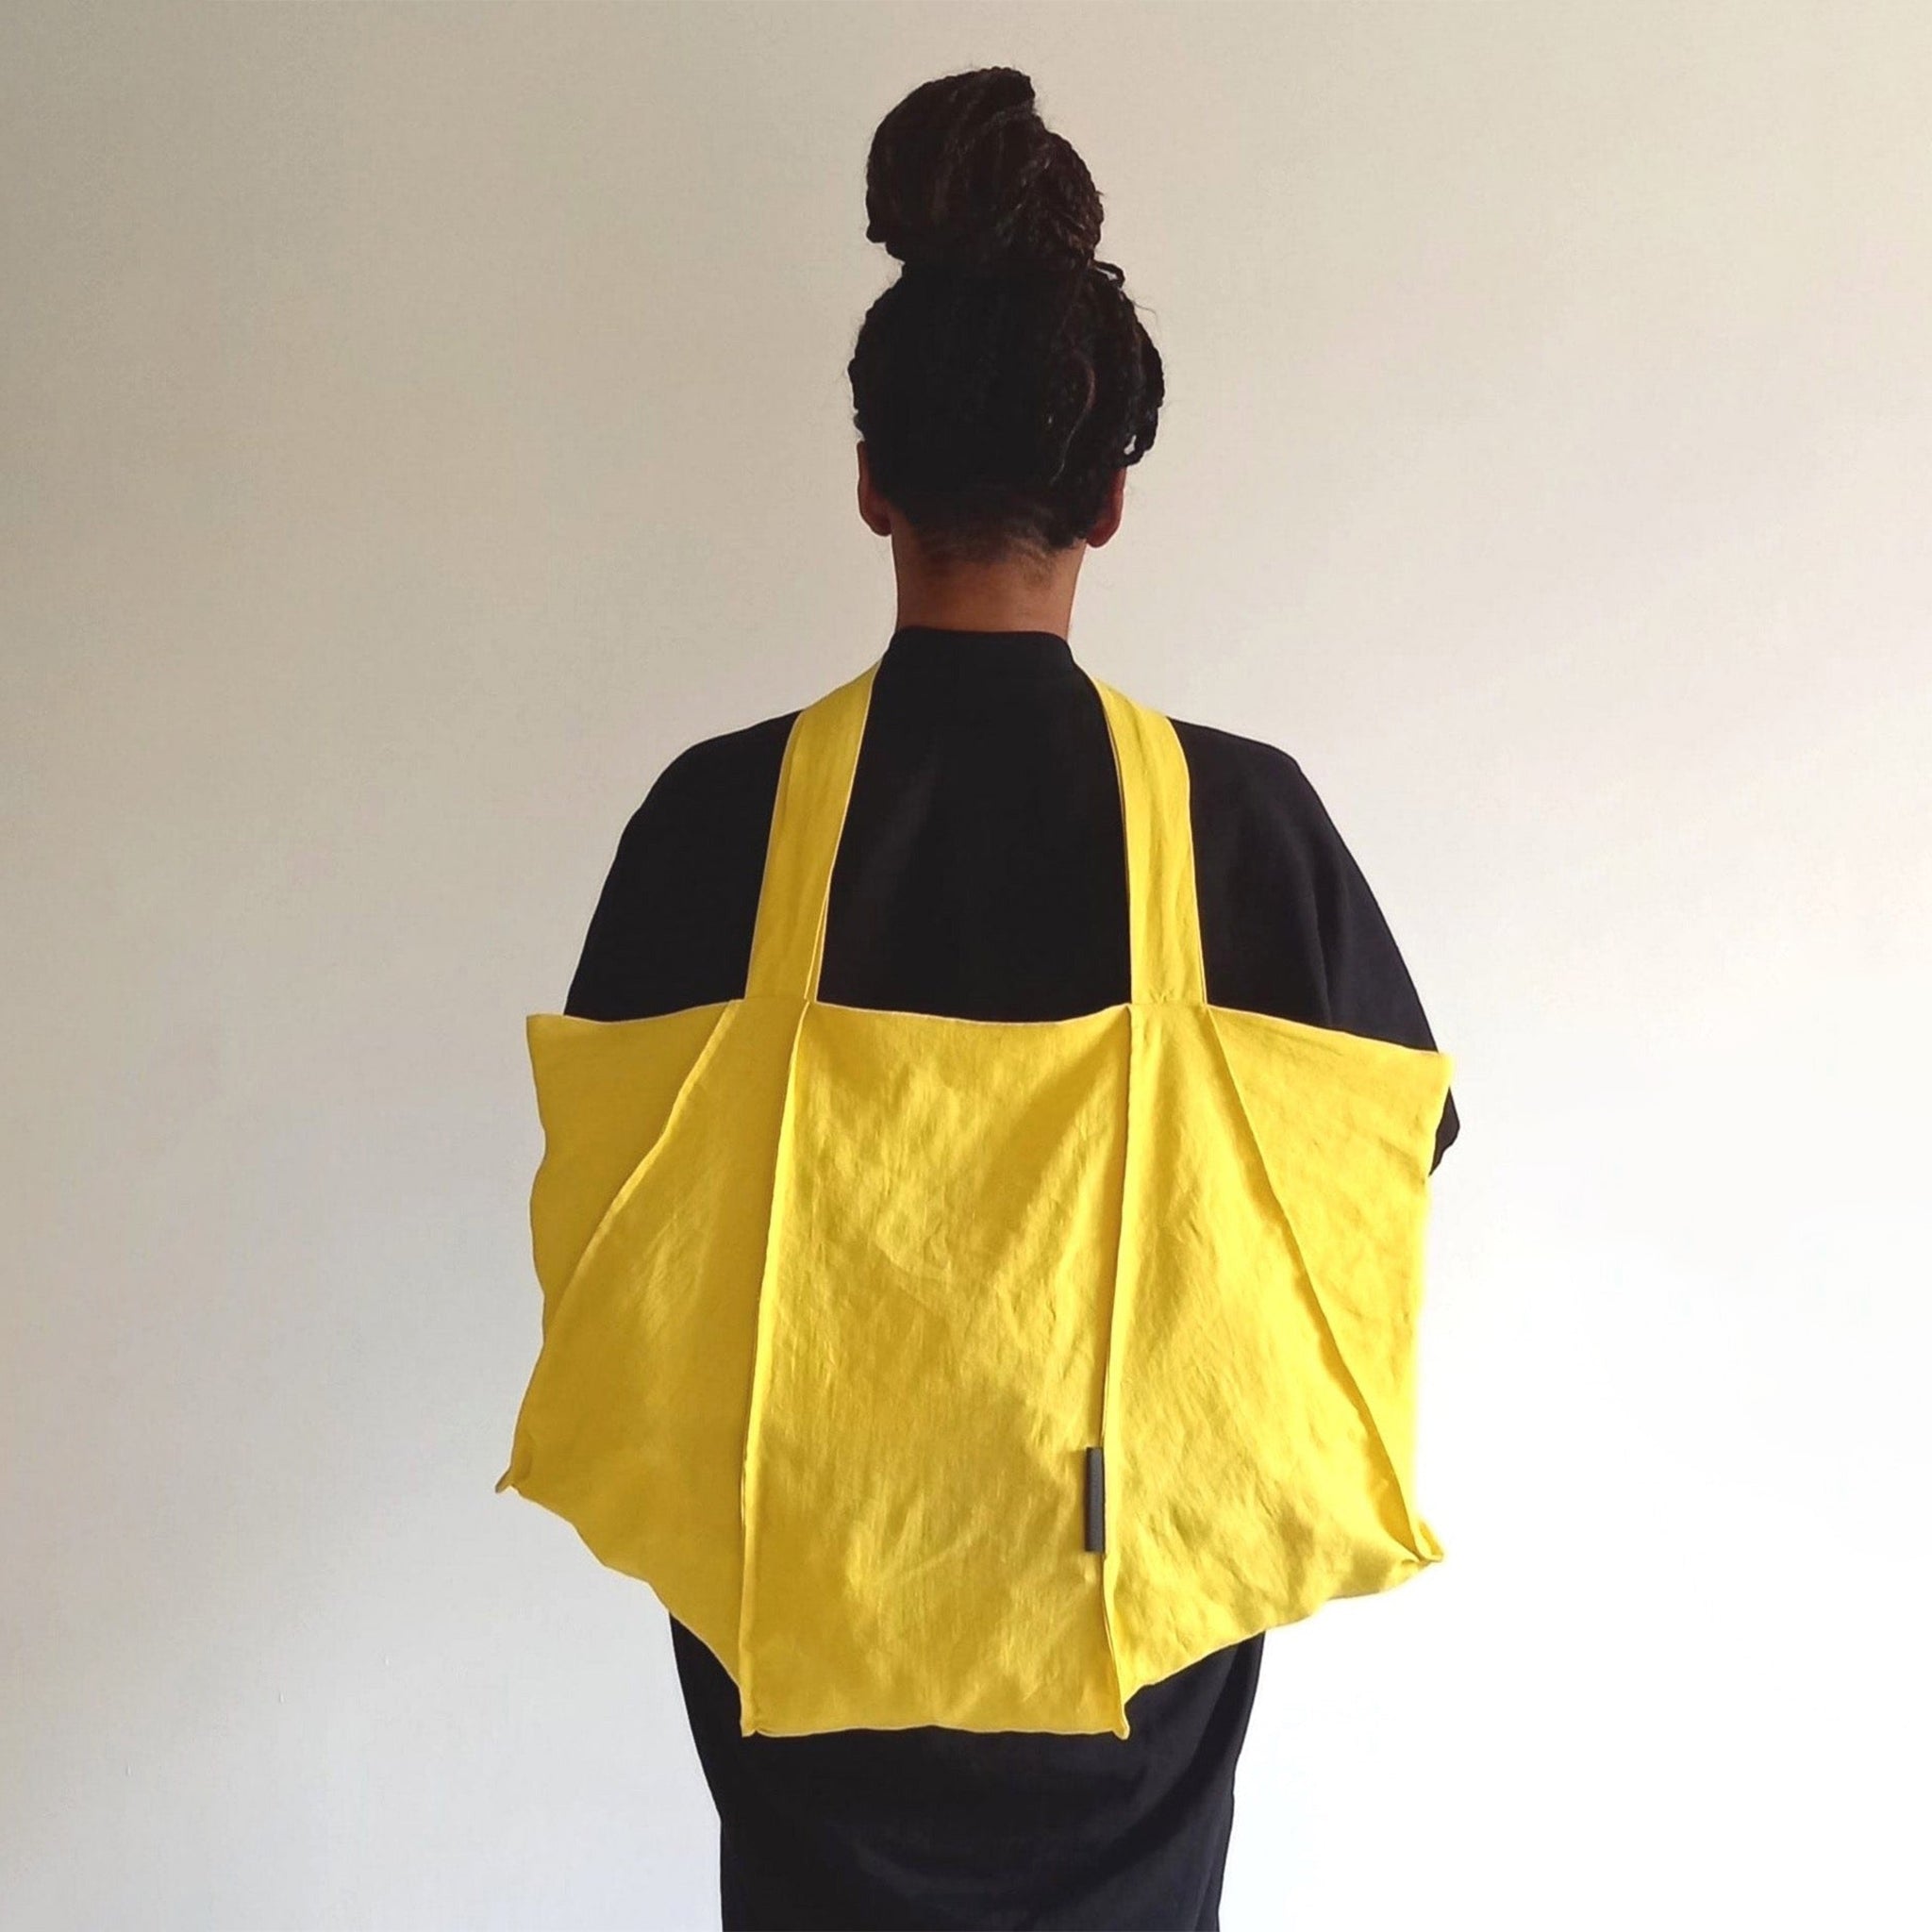 Man wearing The Costume Room sunshine yellow Linen Tote Bag on his back